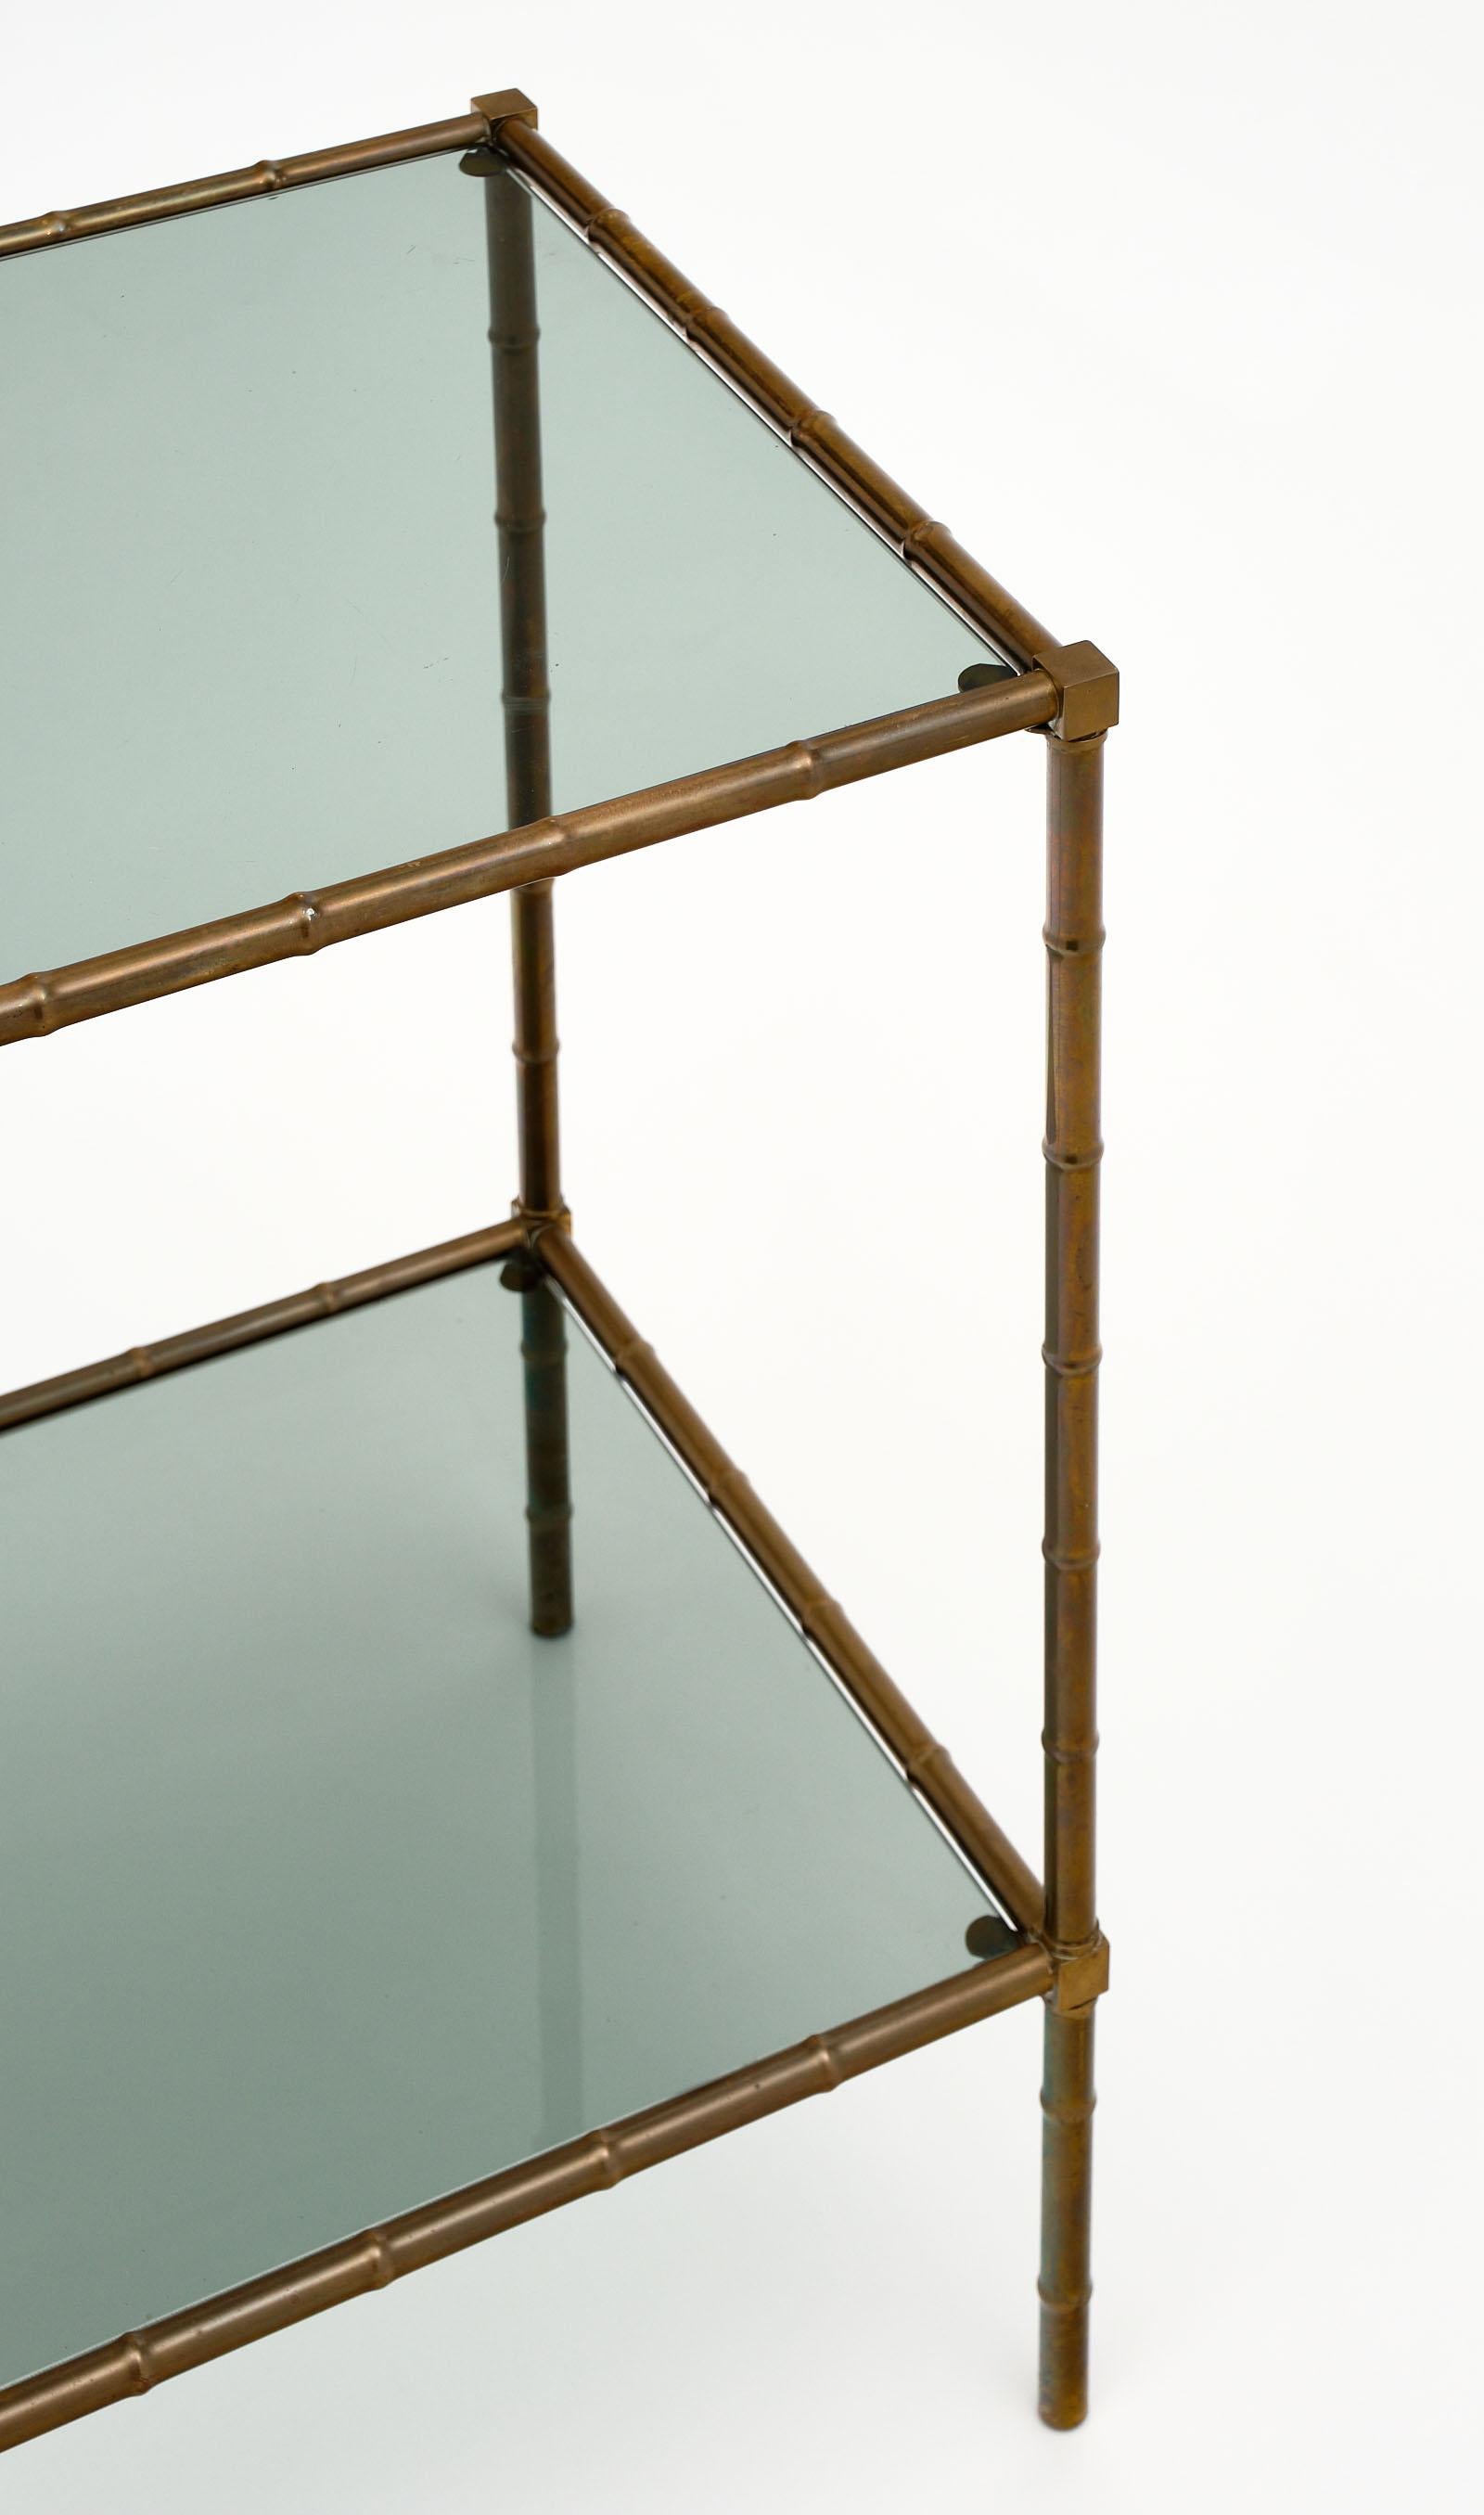 French brass vintage side table with two shelves of smoked glass. The brass frame with a beautiful patina boasts the stylized bamboo detail, attributed to Maison Baguès.